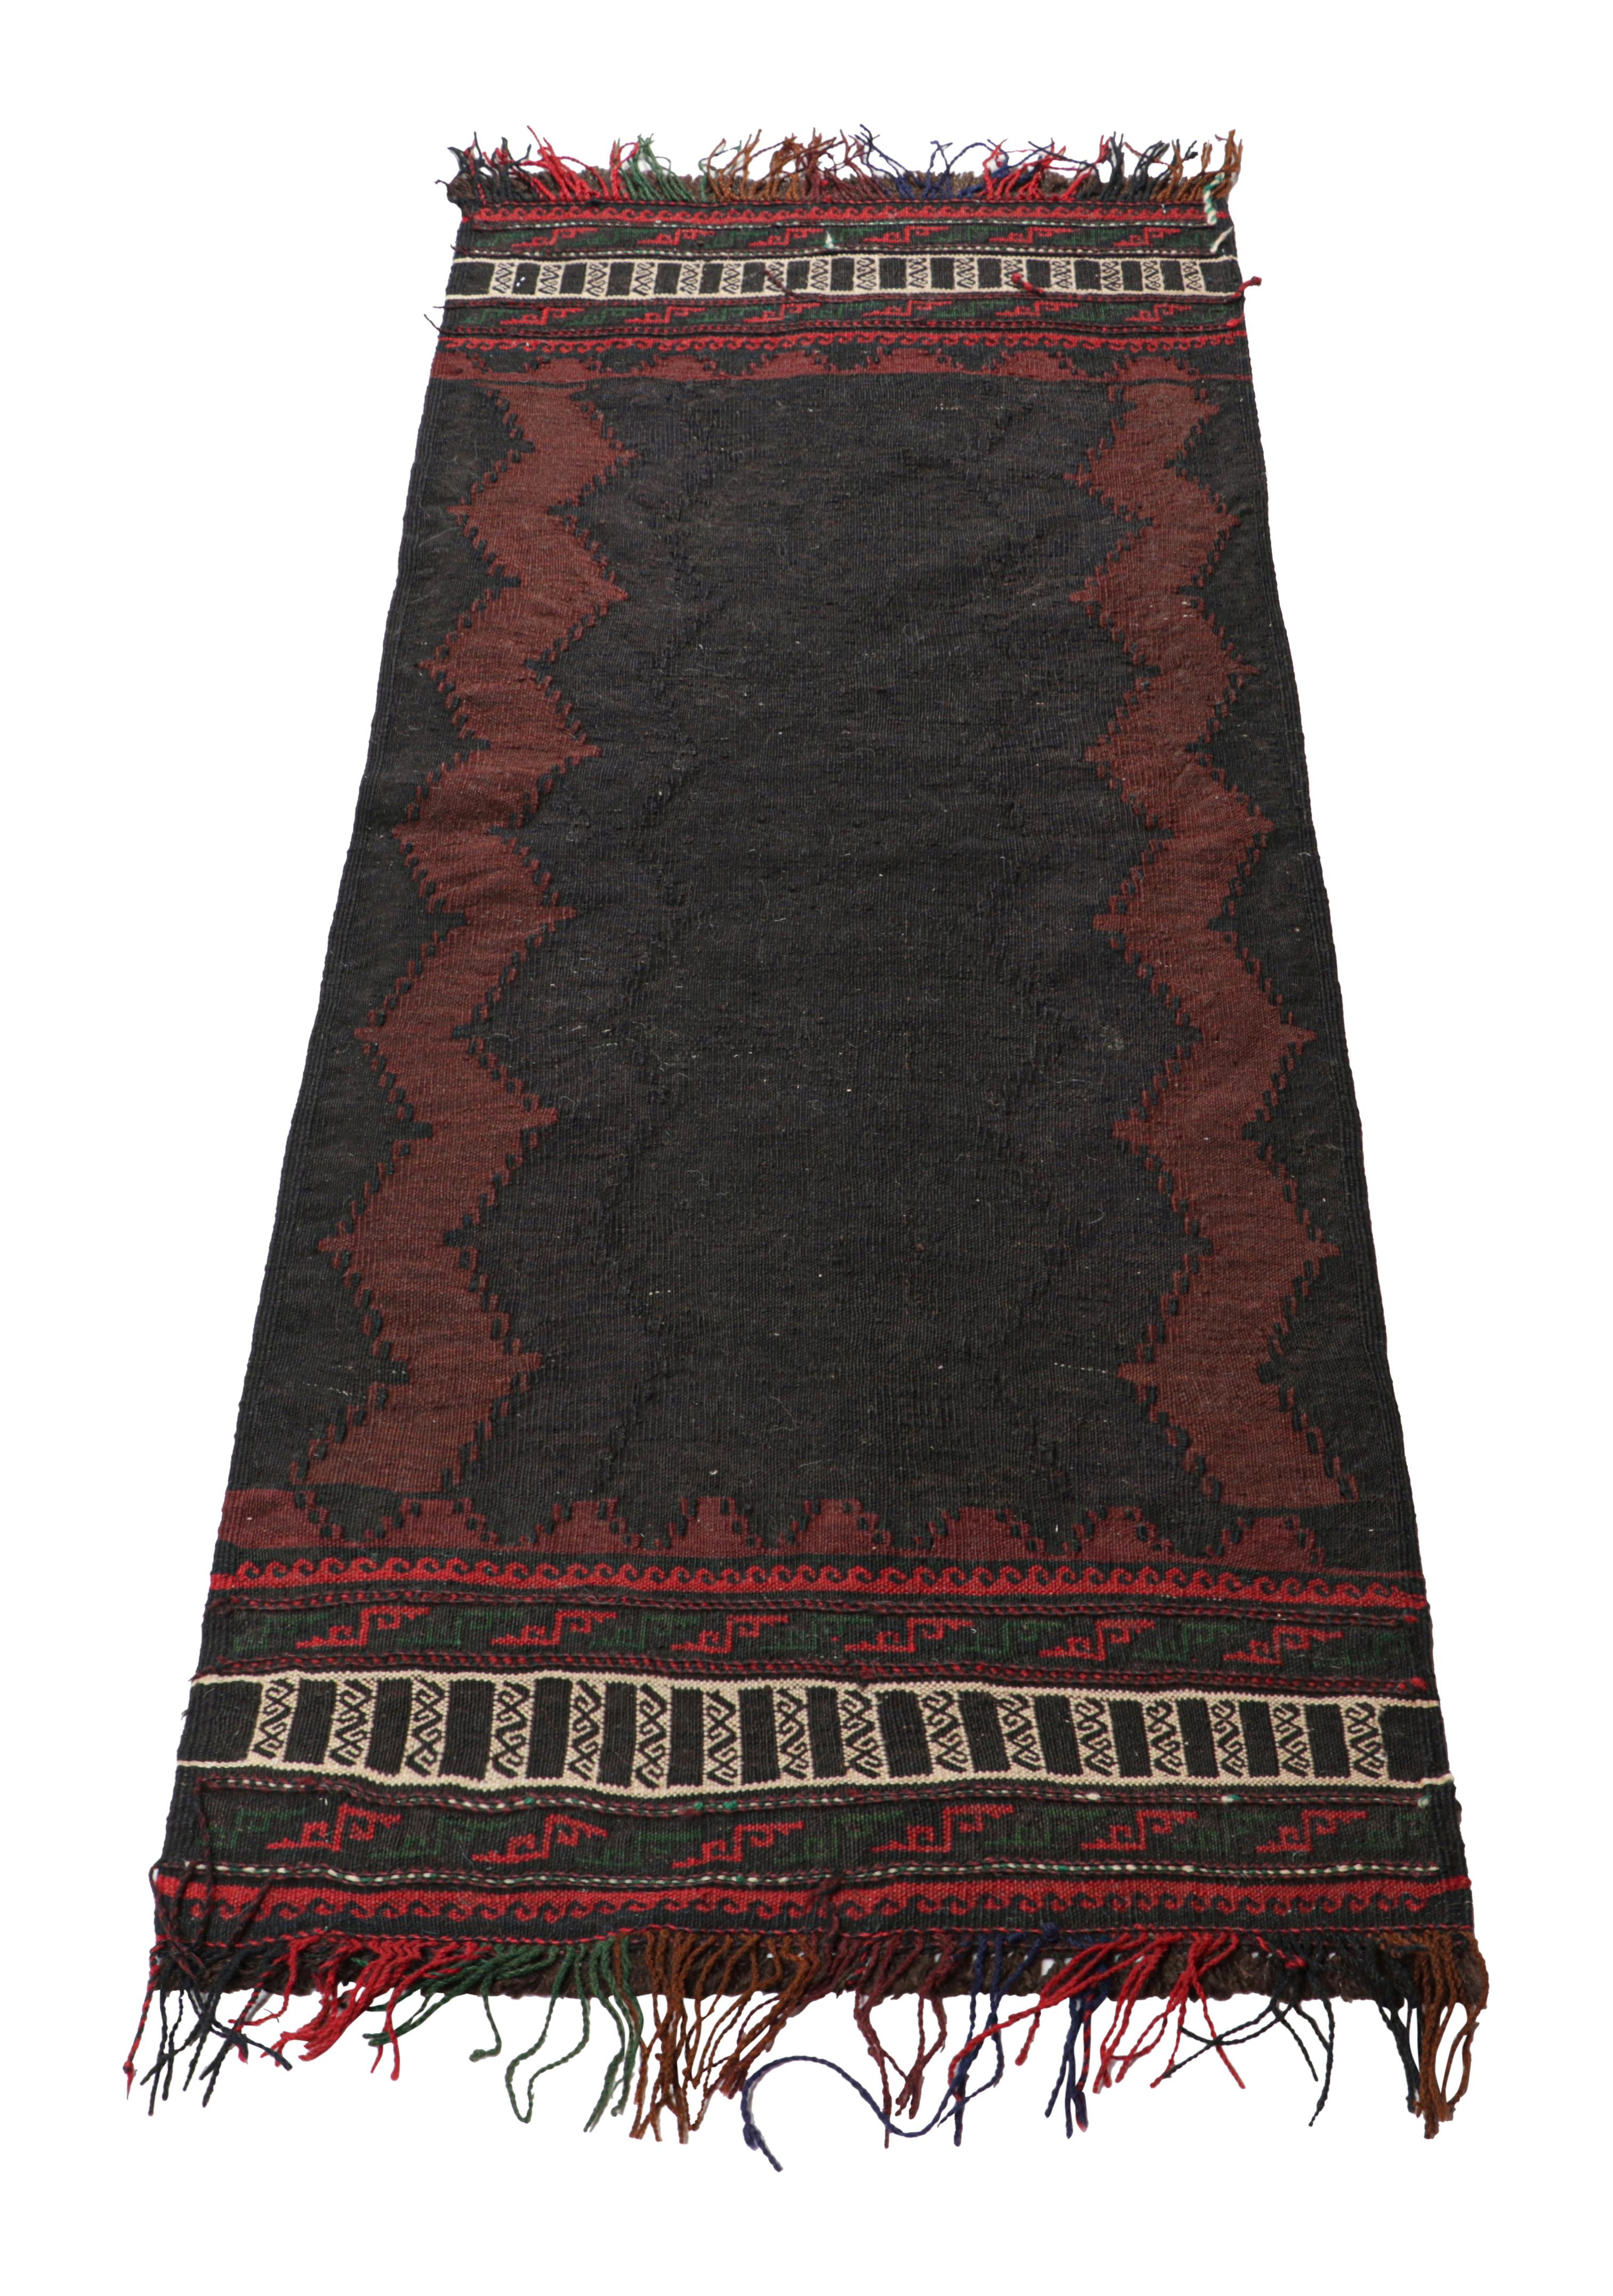 Hand-Woven Vintage Afghan Kilim, in Black with Burgundy Chevrons, from Rug & Kilim For Sale